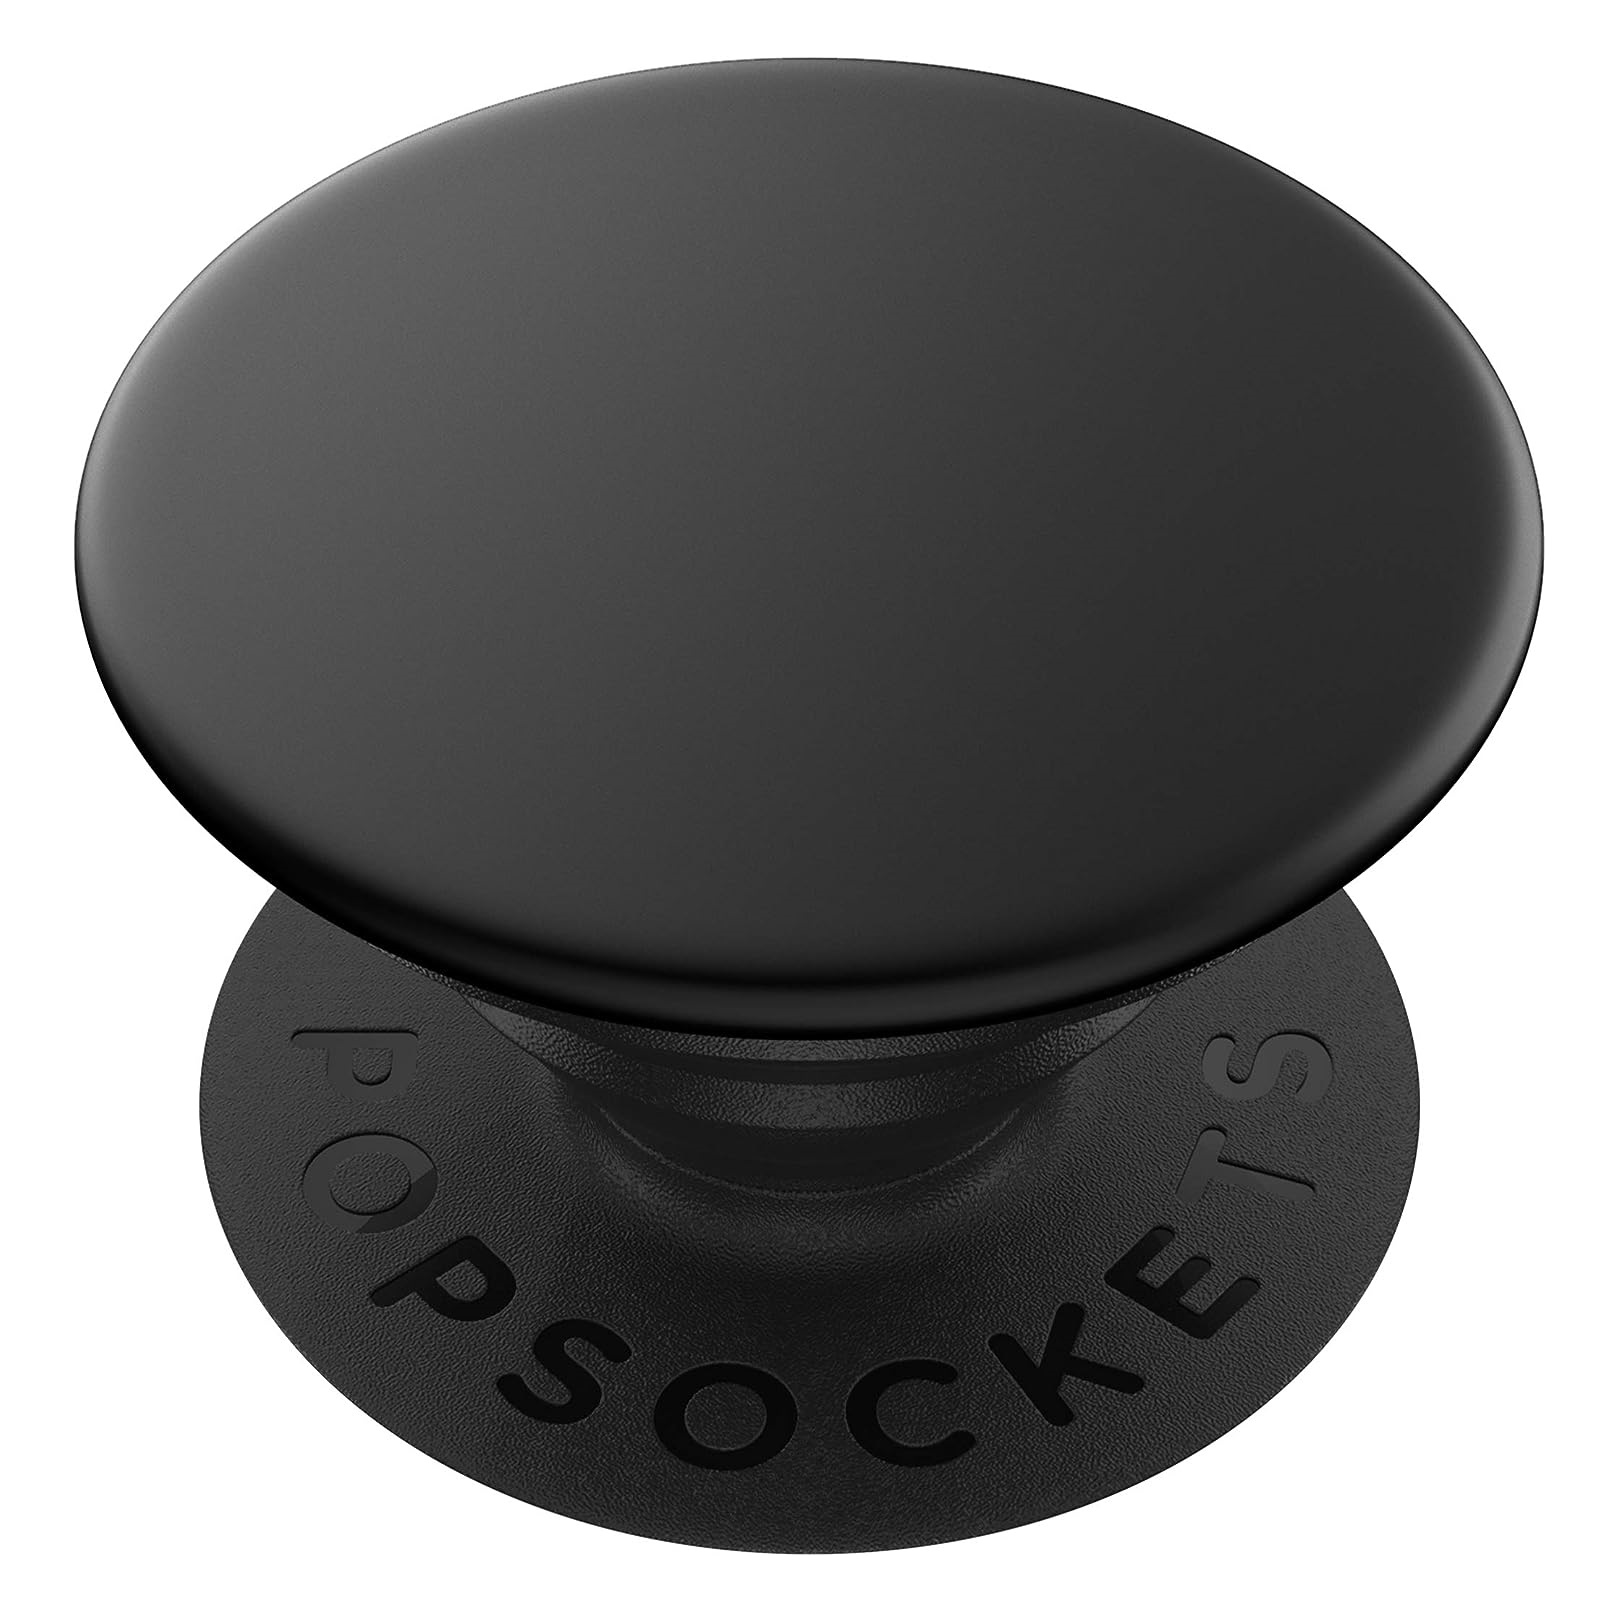 PopSockets Adhesive Phone Grip with Expandable Kickstand and swappable top - PopGrip Black - image 1 of 5